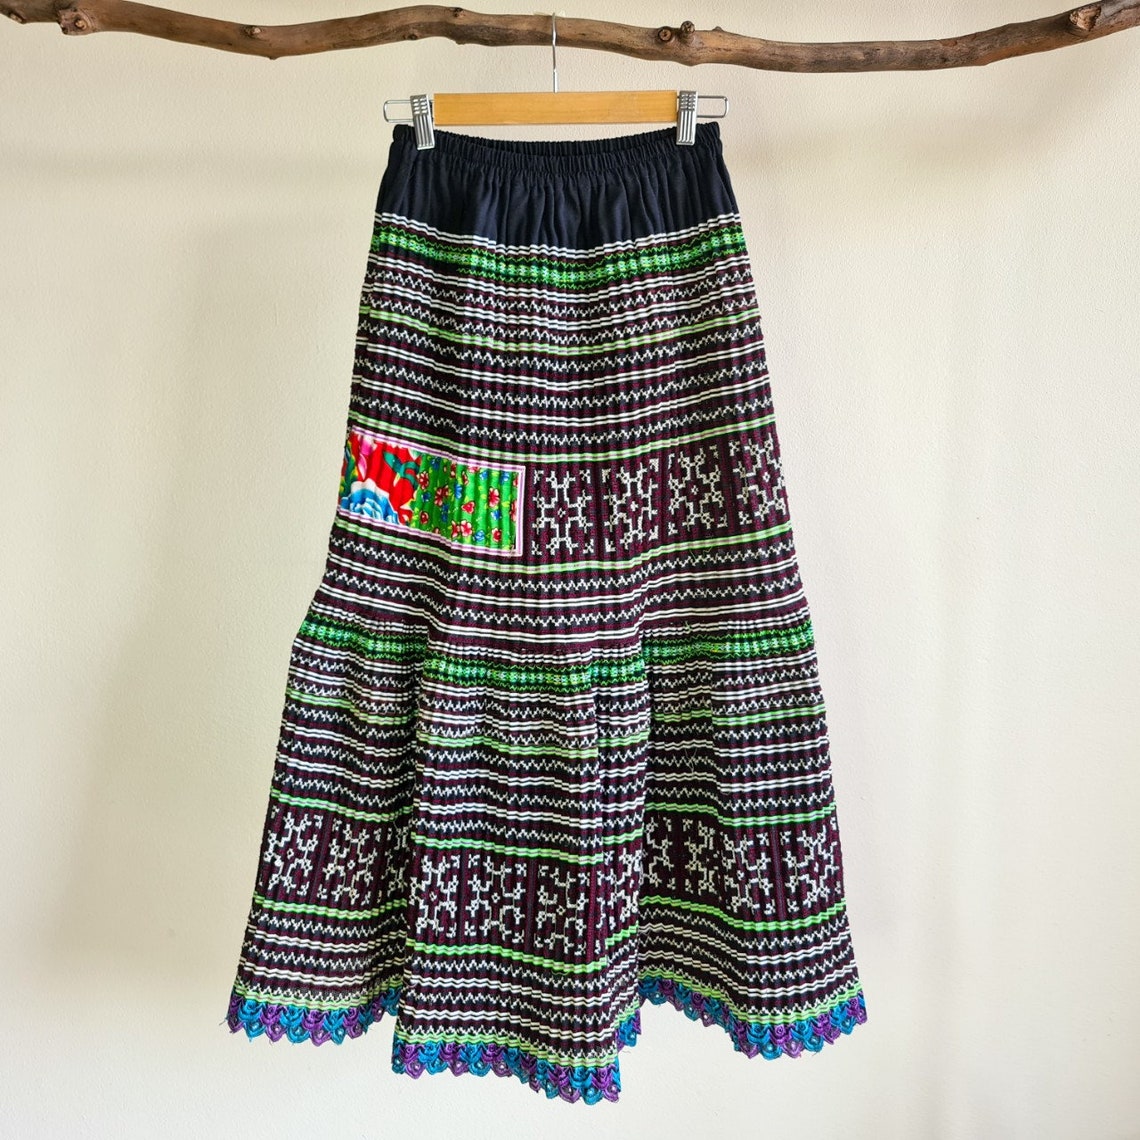 Hmong Pleated Skirt hill tribe skirt hand embroidered | Etsy